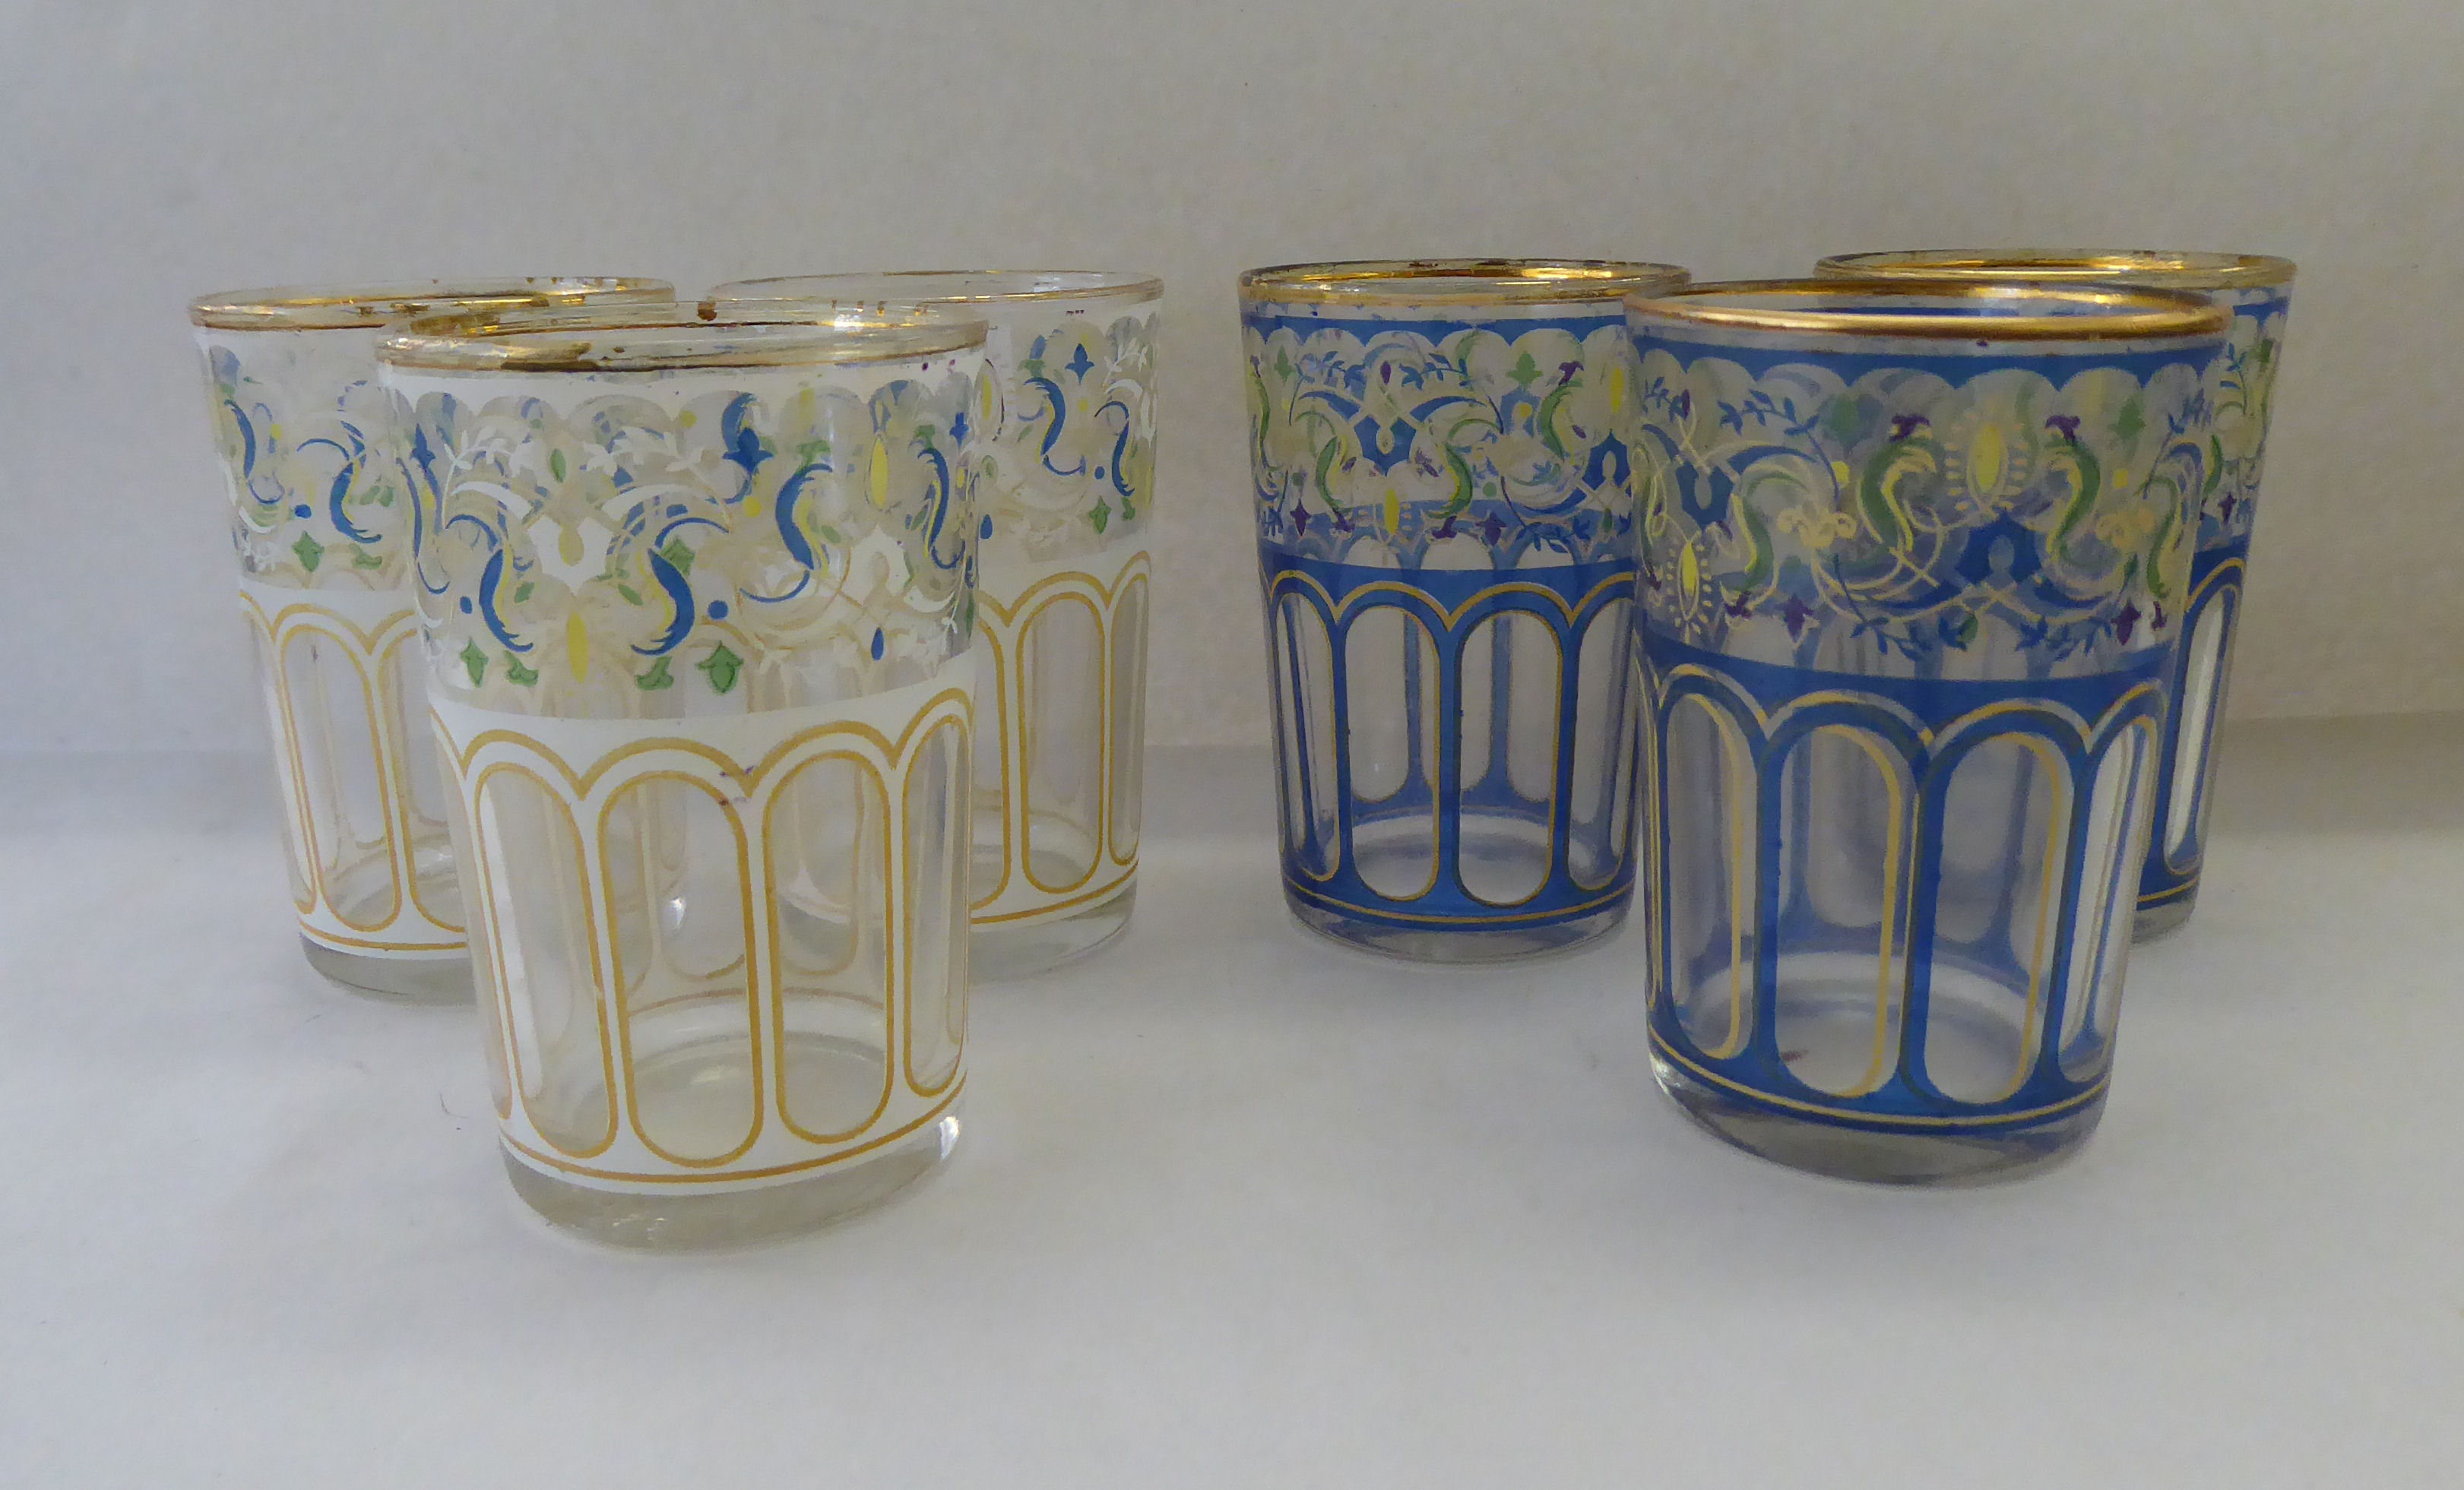 Six Venetian inspired glass tumblers, in two different coloured patterns